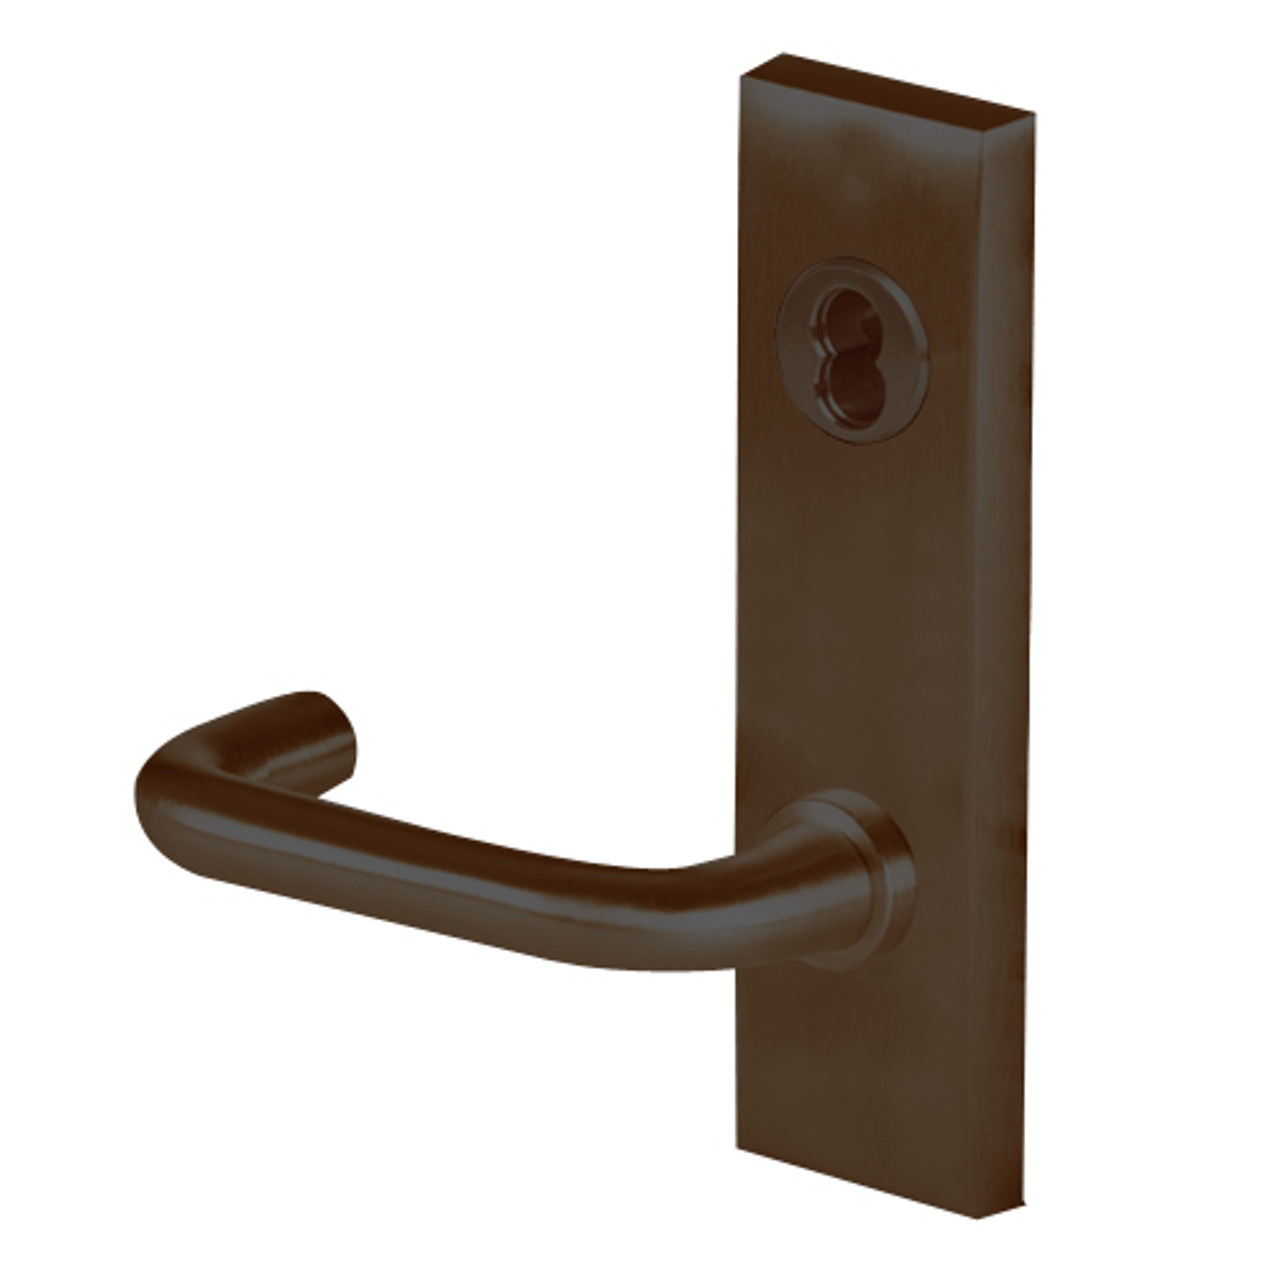 45H7W3M613 Best 40H Series Storeroom without Deadbolt Heavy Duty Mortise Lever Lock with Solid Tube Return Style in Oil Rubbed Bronze